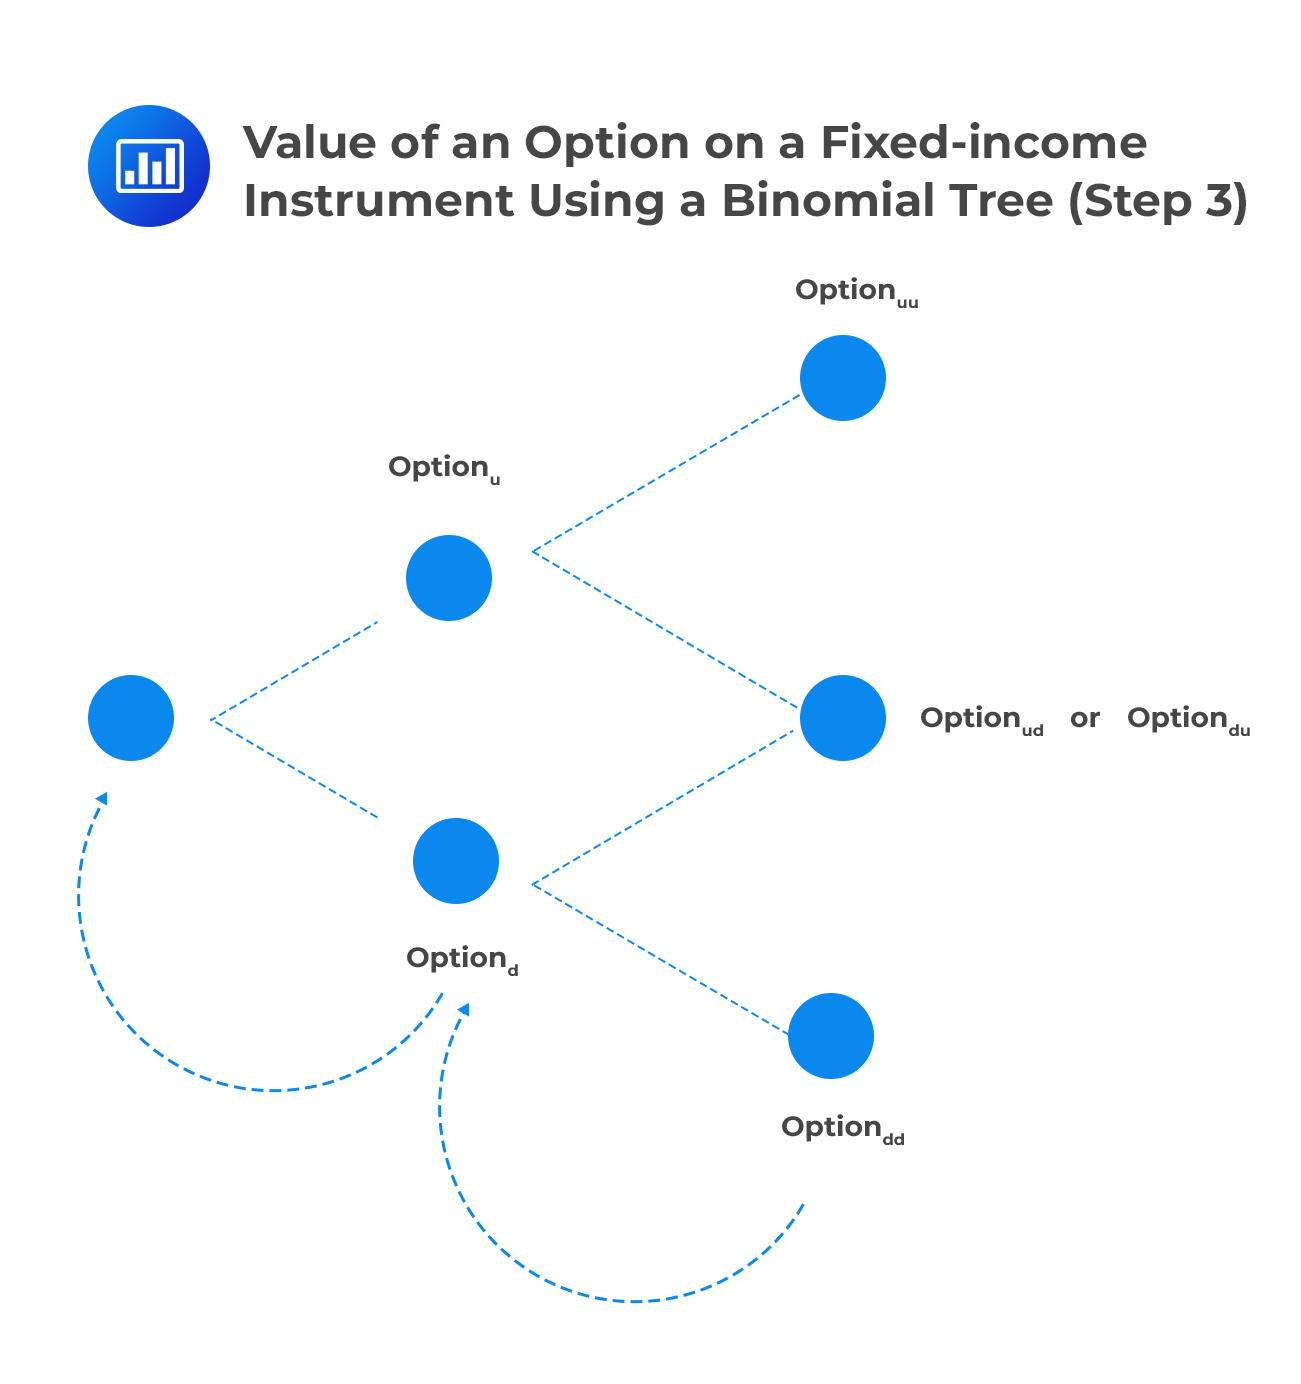 Value of an Option on a Fixed-income Instrument Using a Binomial Tree (Step 3)